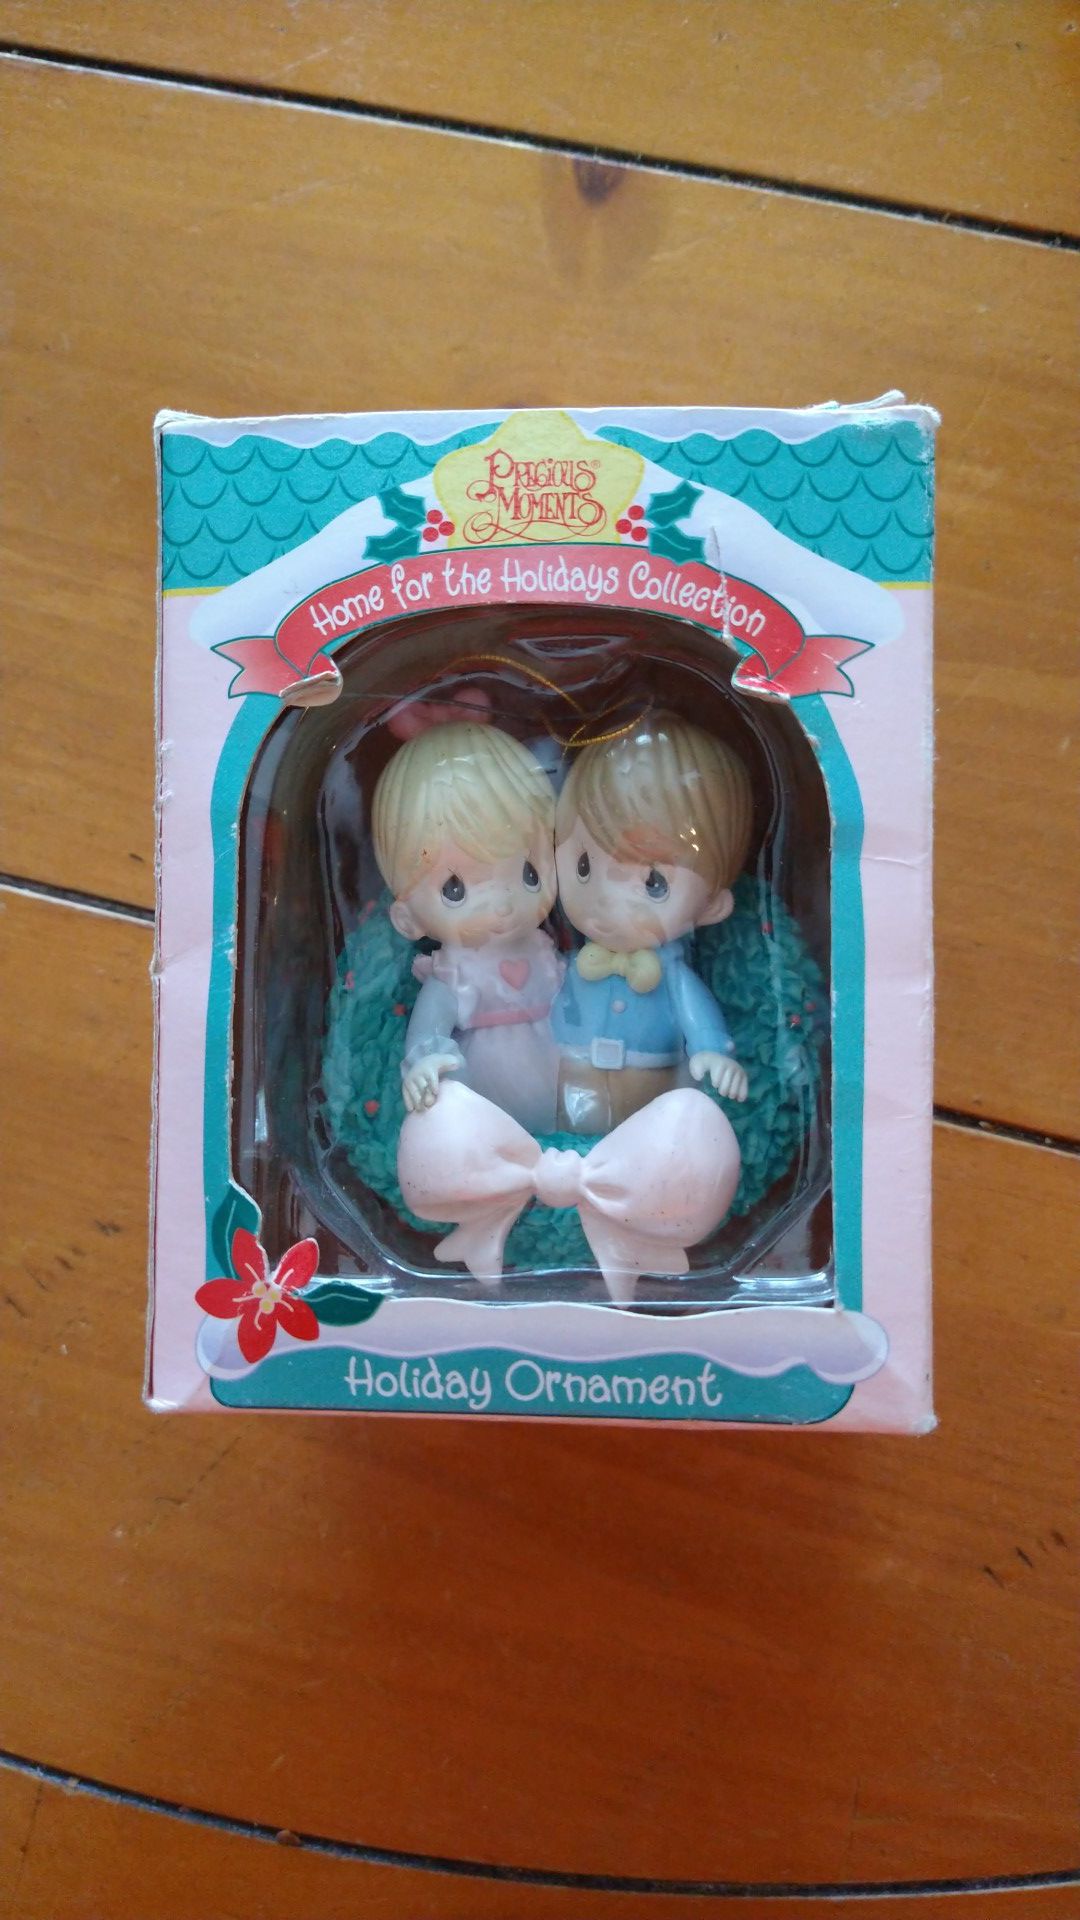 1995 home for the holiday collection precious moment holiday ornament